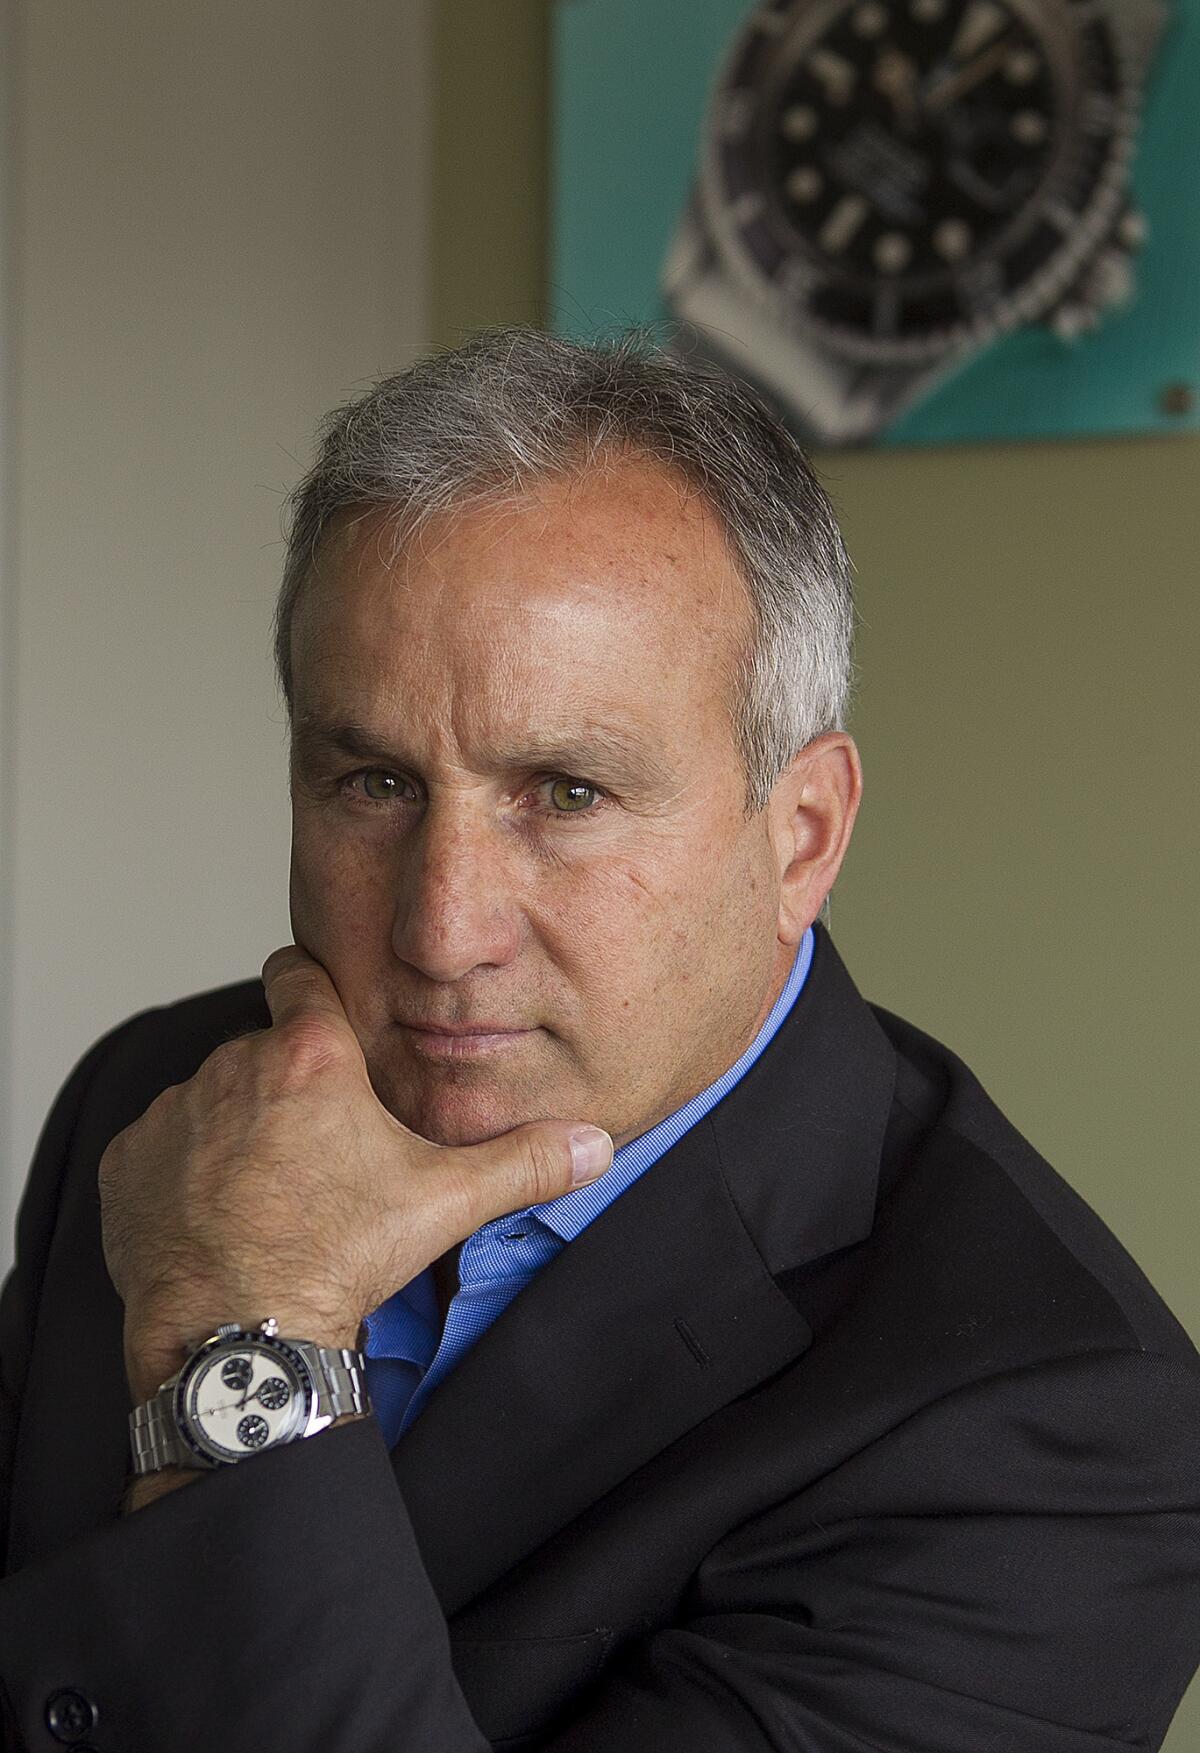 Paul Altieri is the founder and CEO of Huntington Beach-based Bob's Watches.